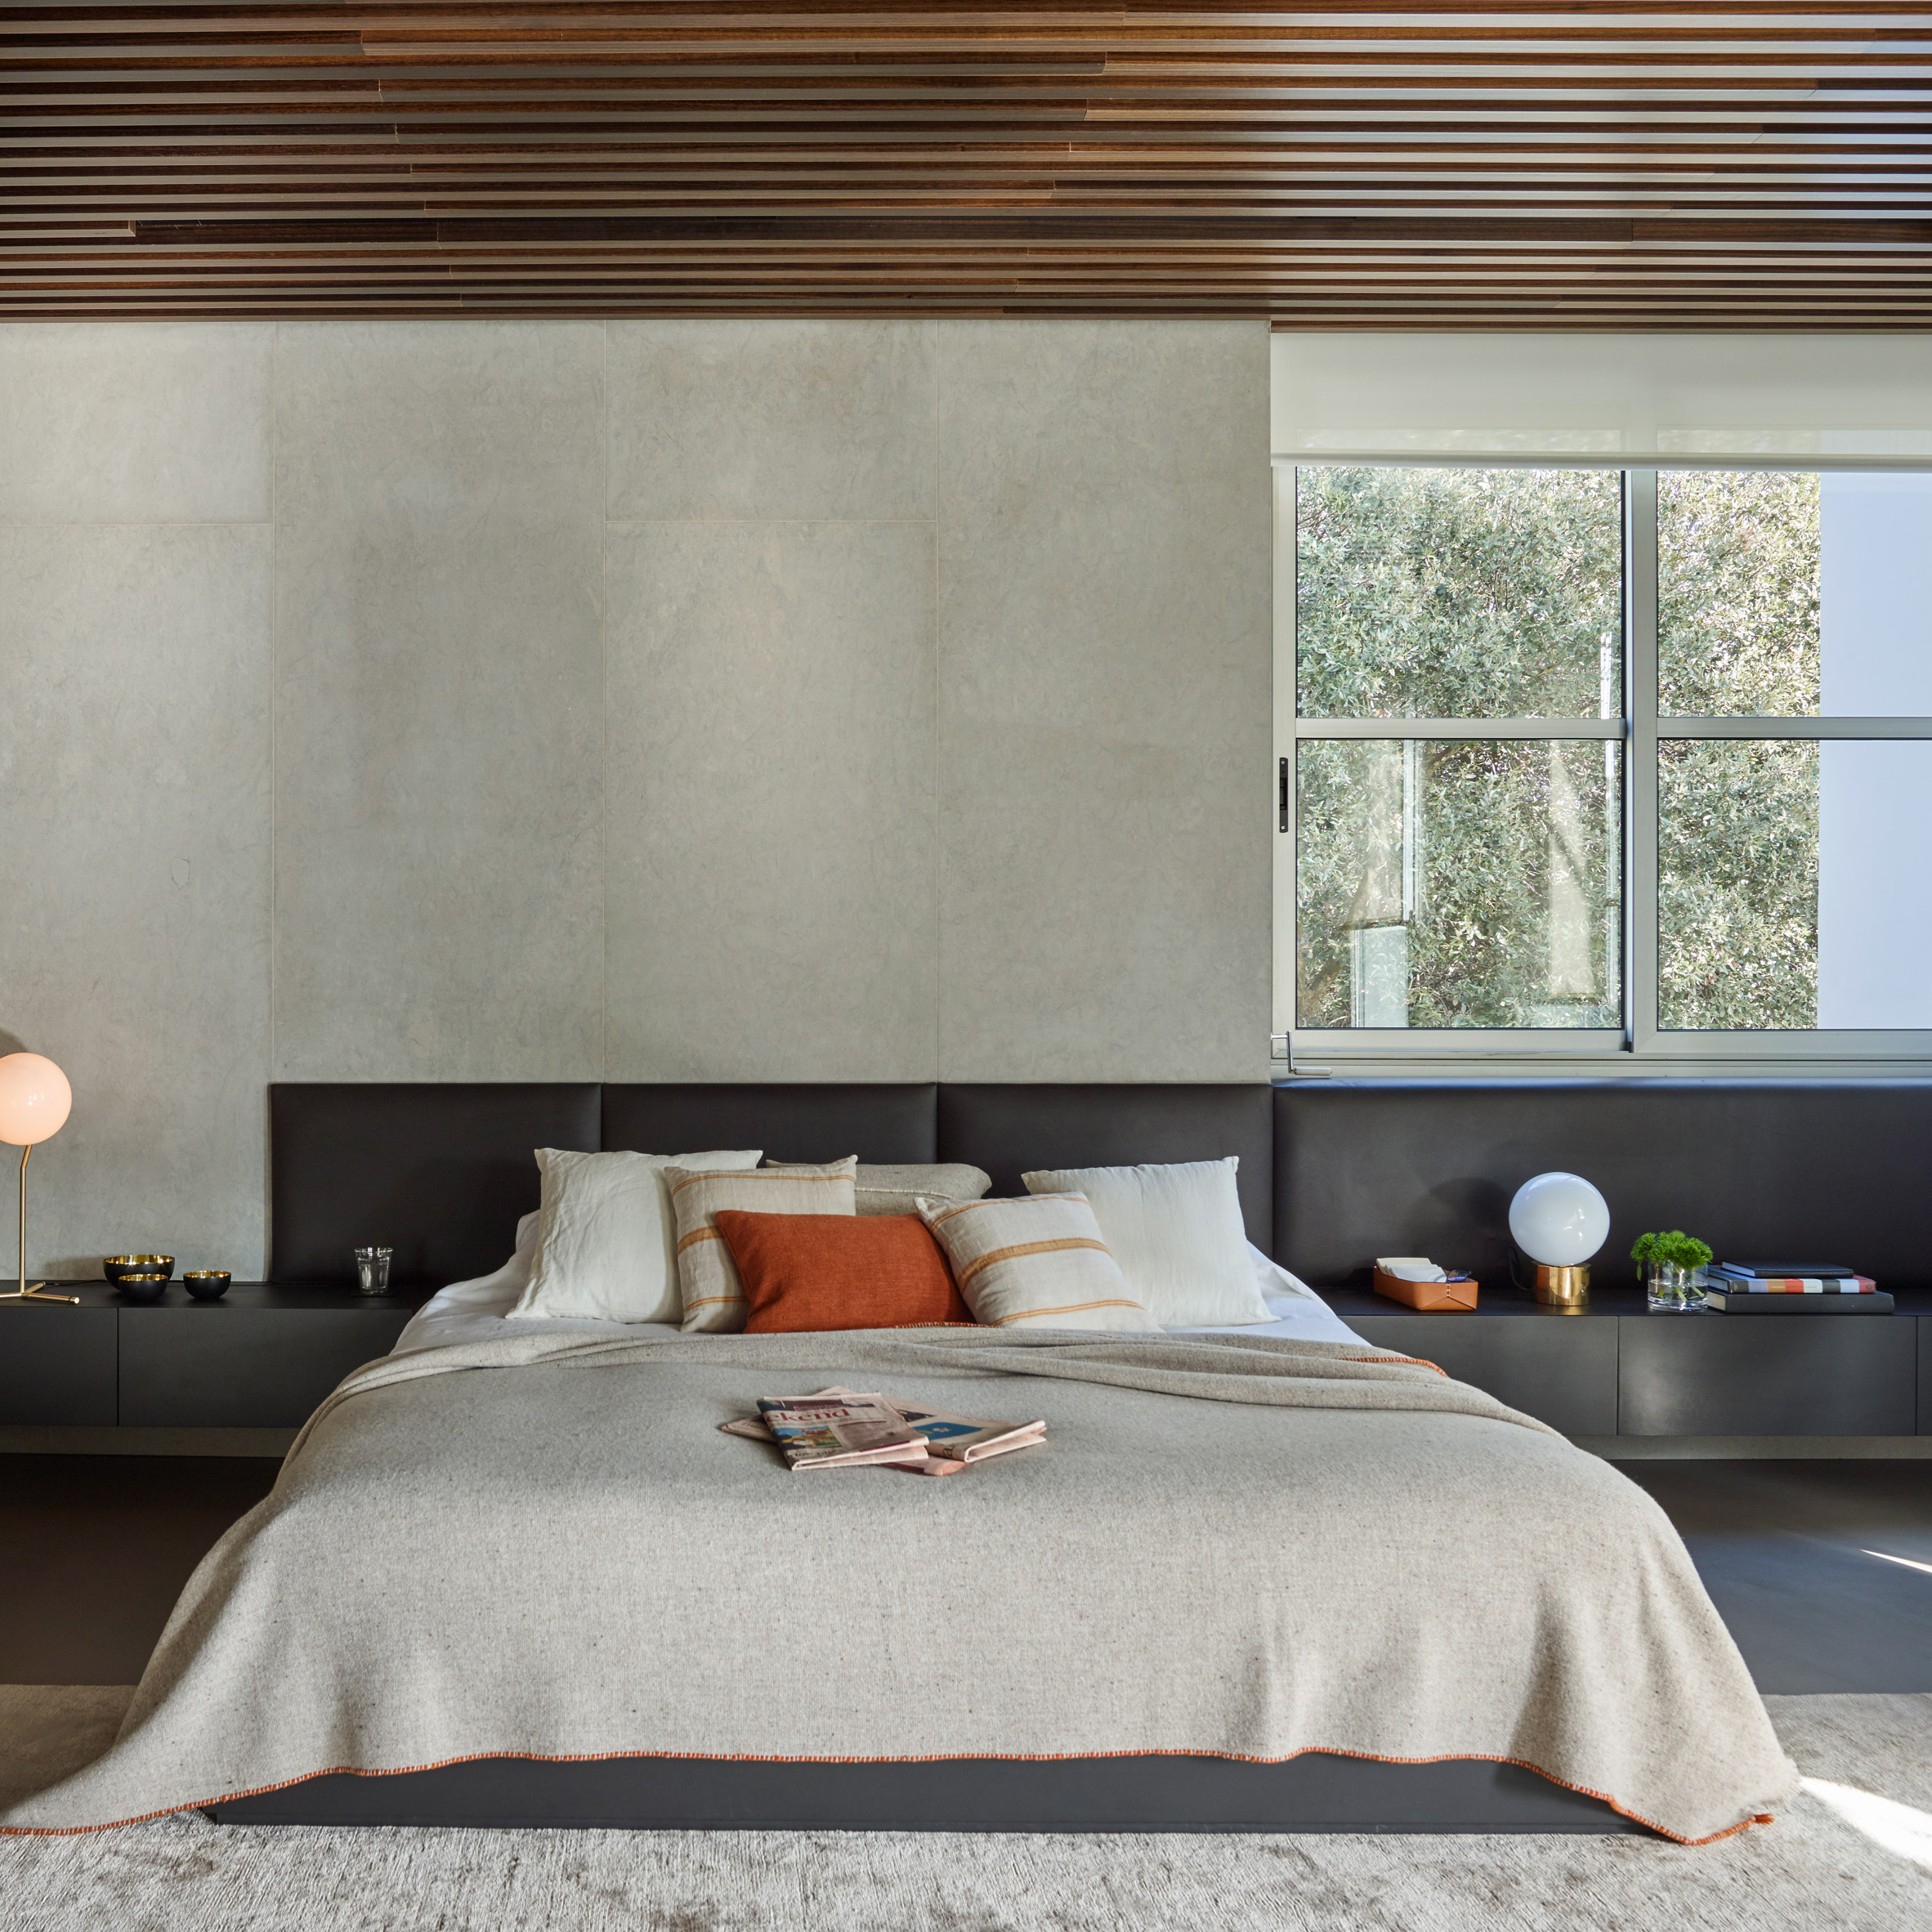 Bedroom in holiday home by YLAB Arquitectos